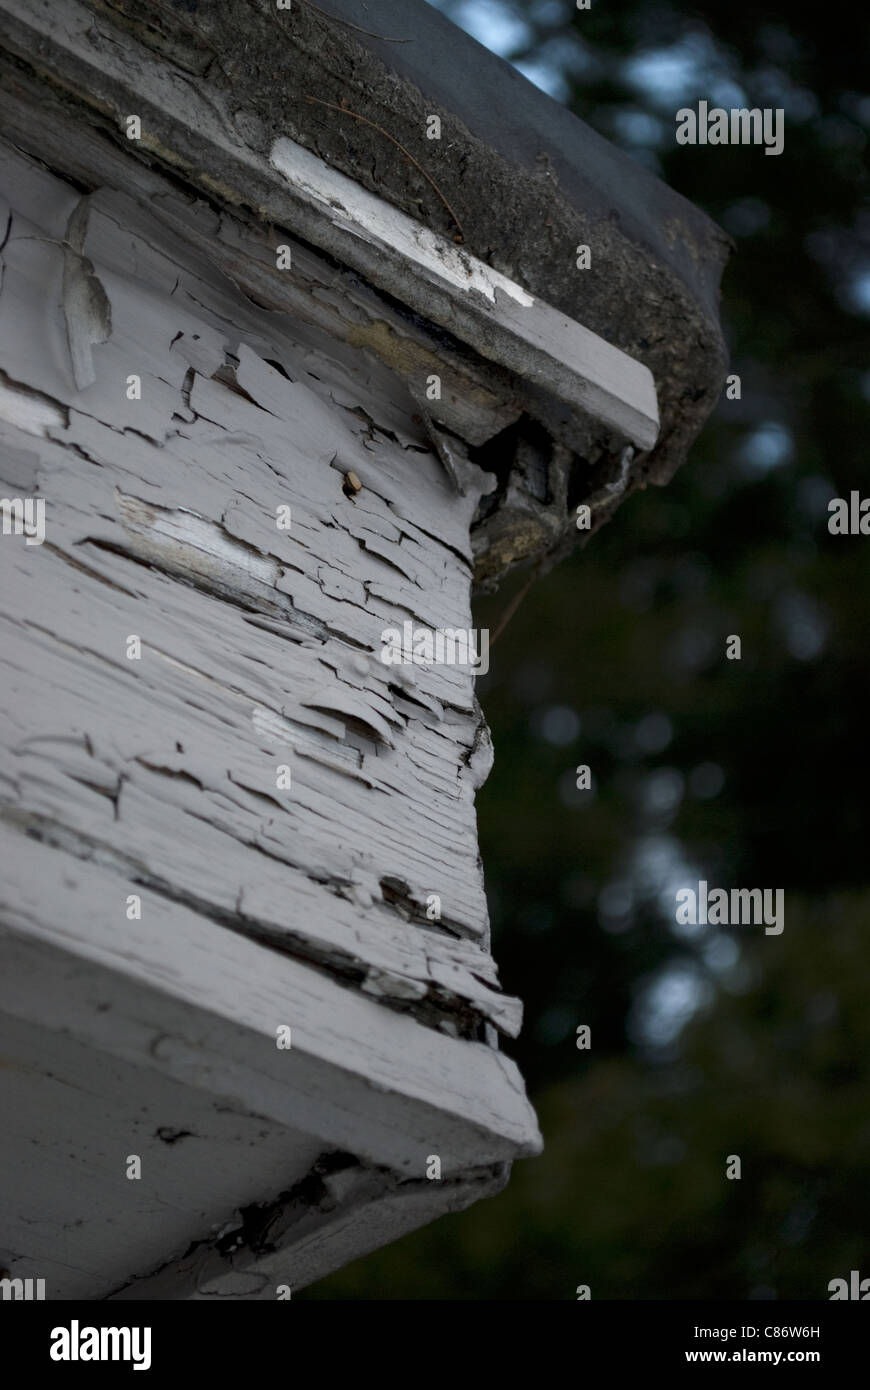 Corner of a roof overhang with peeling paint, rotting wood, and tar roofing material. Stock Photo